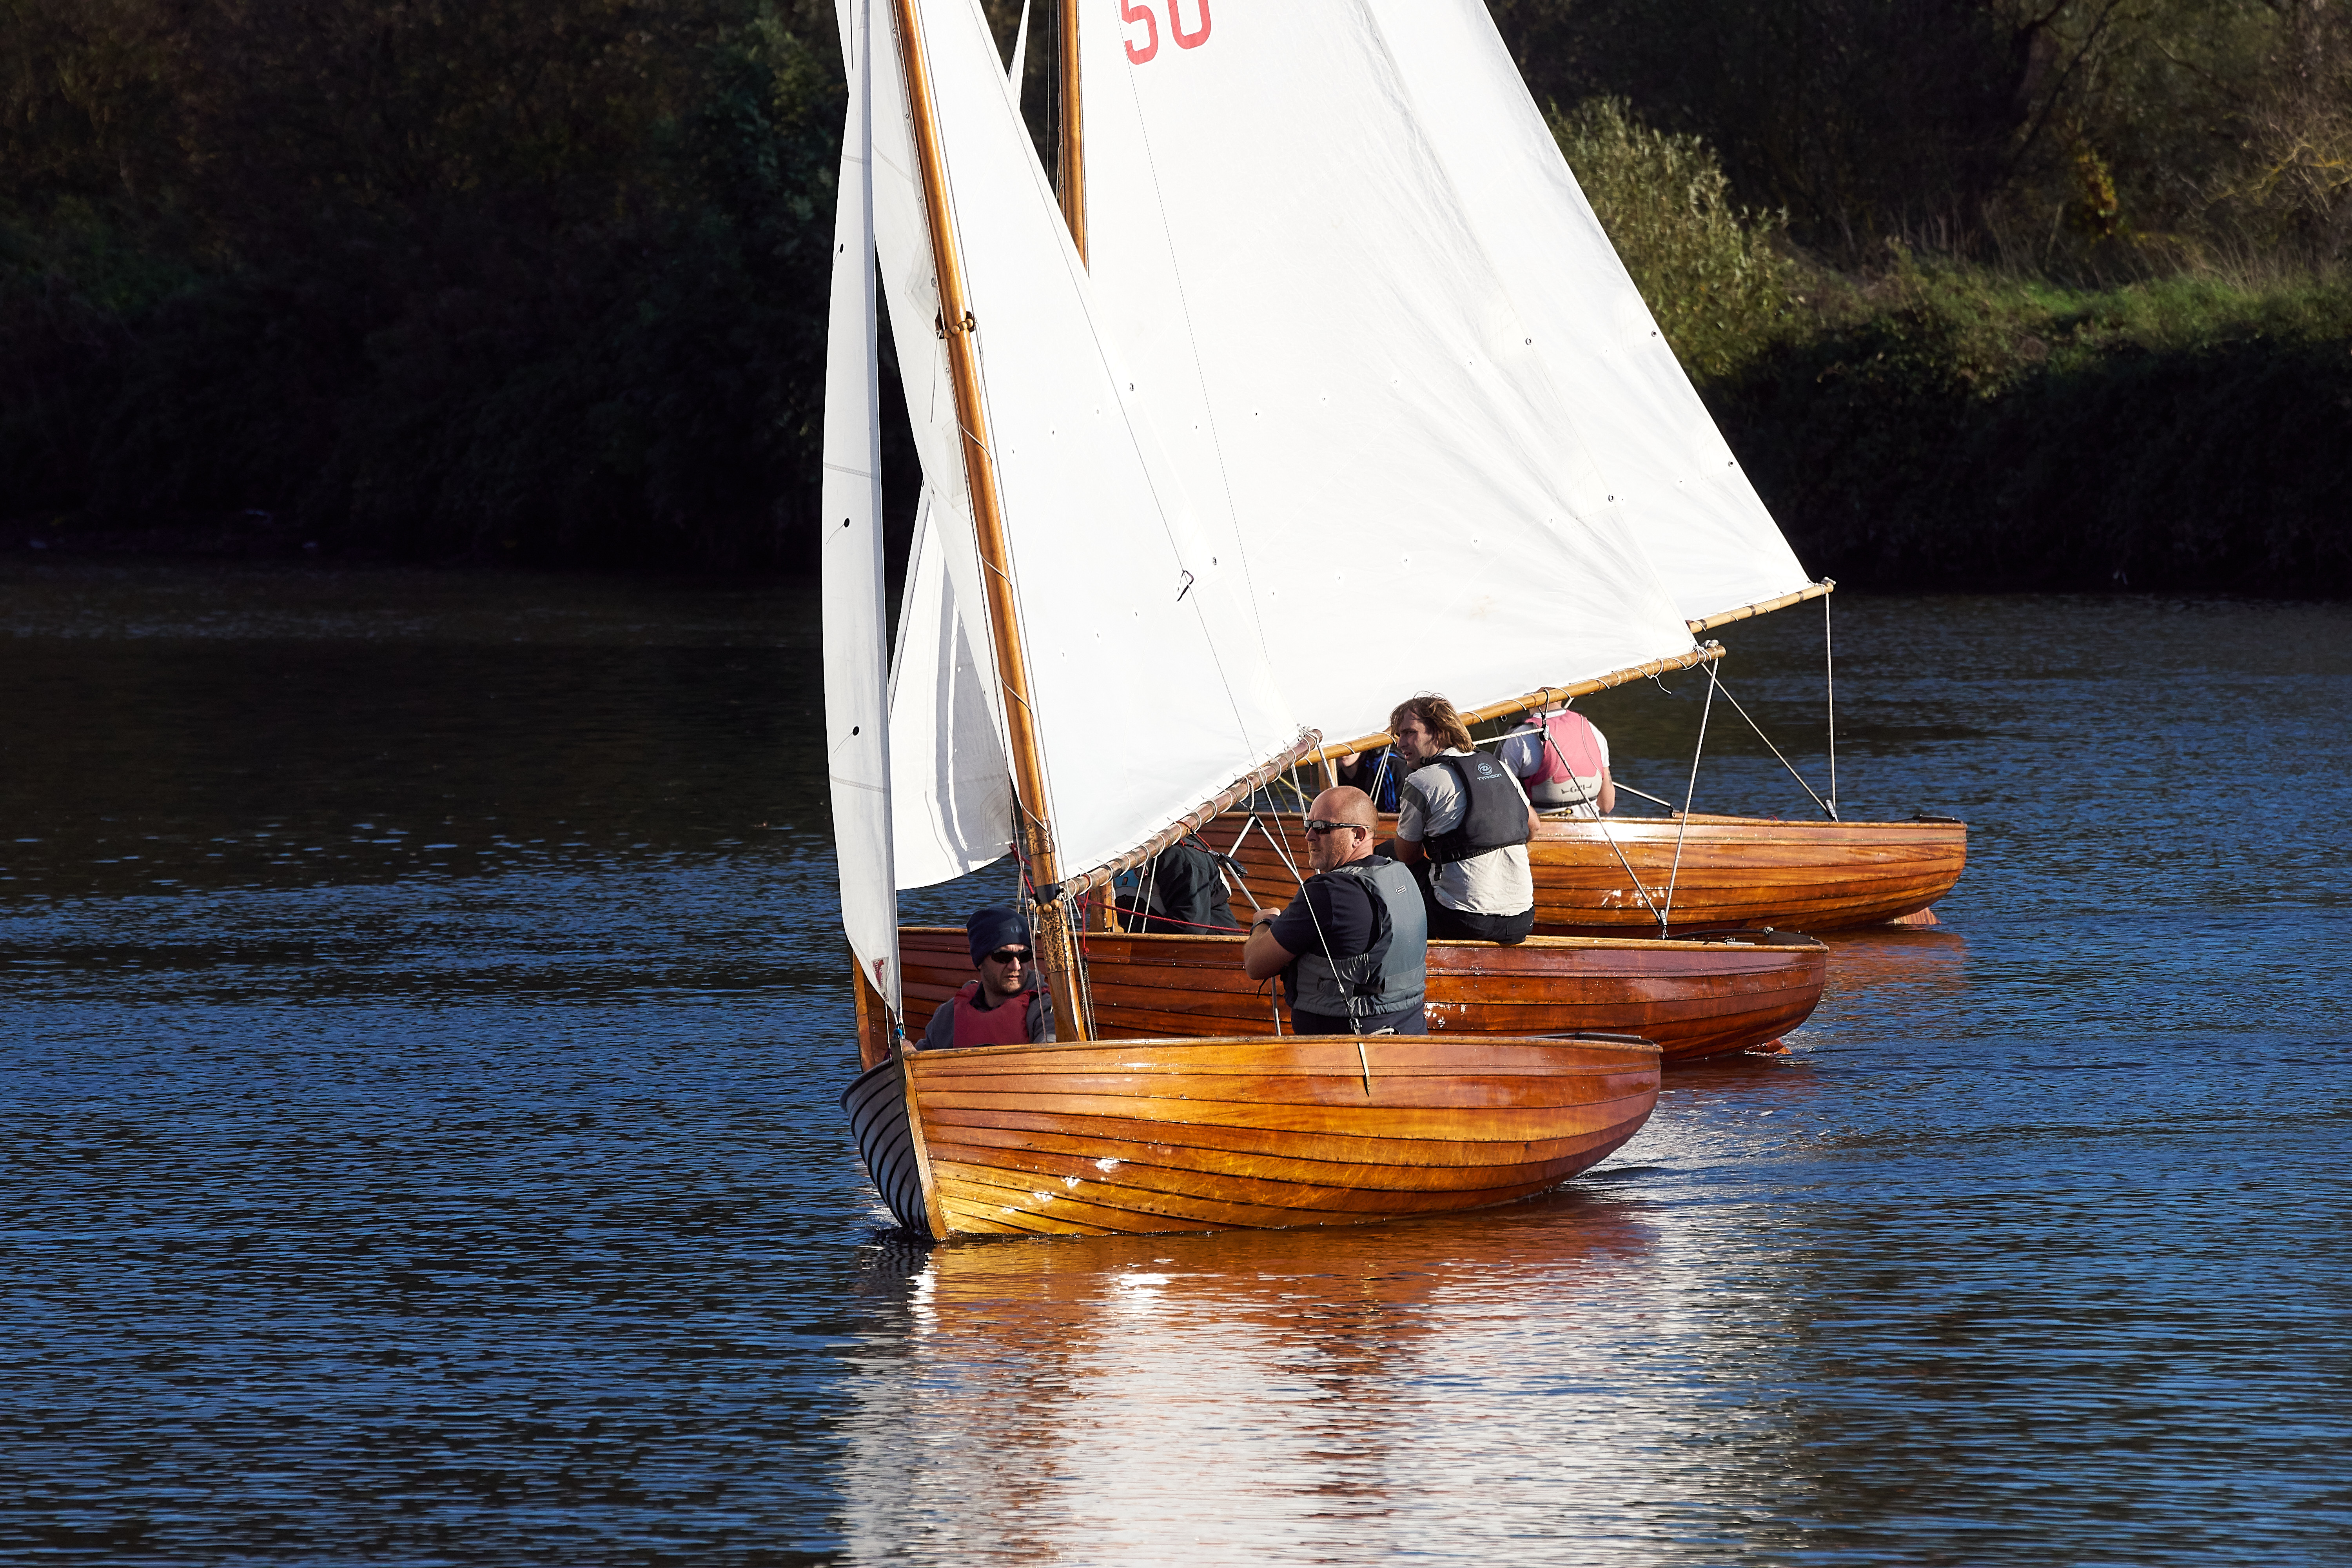 Classic Boat Award 2020 Highly Commended: Norfolk Dinghies in Evening Sun by Sandy Miller